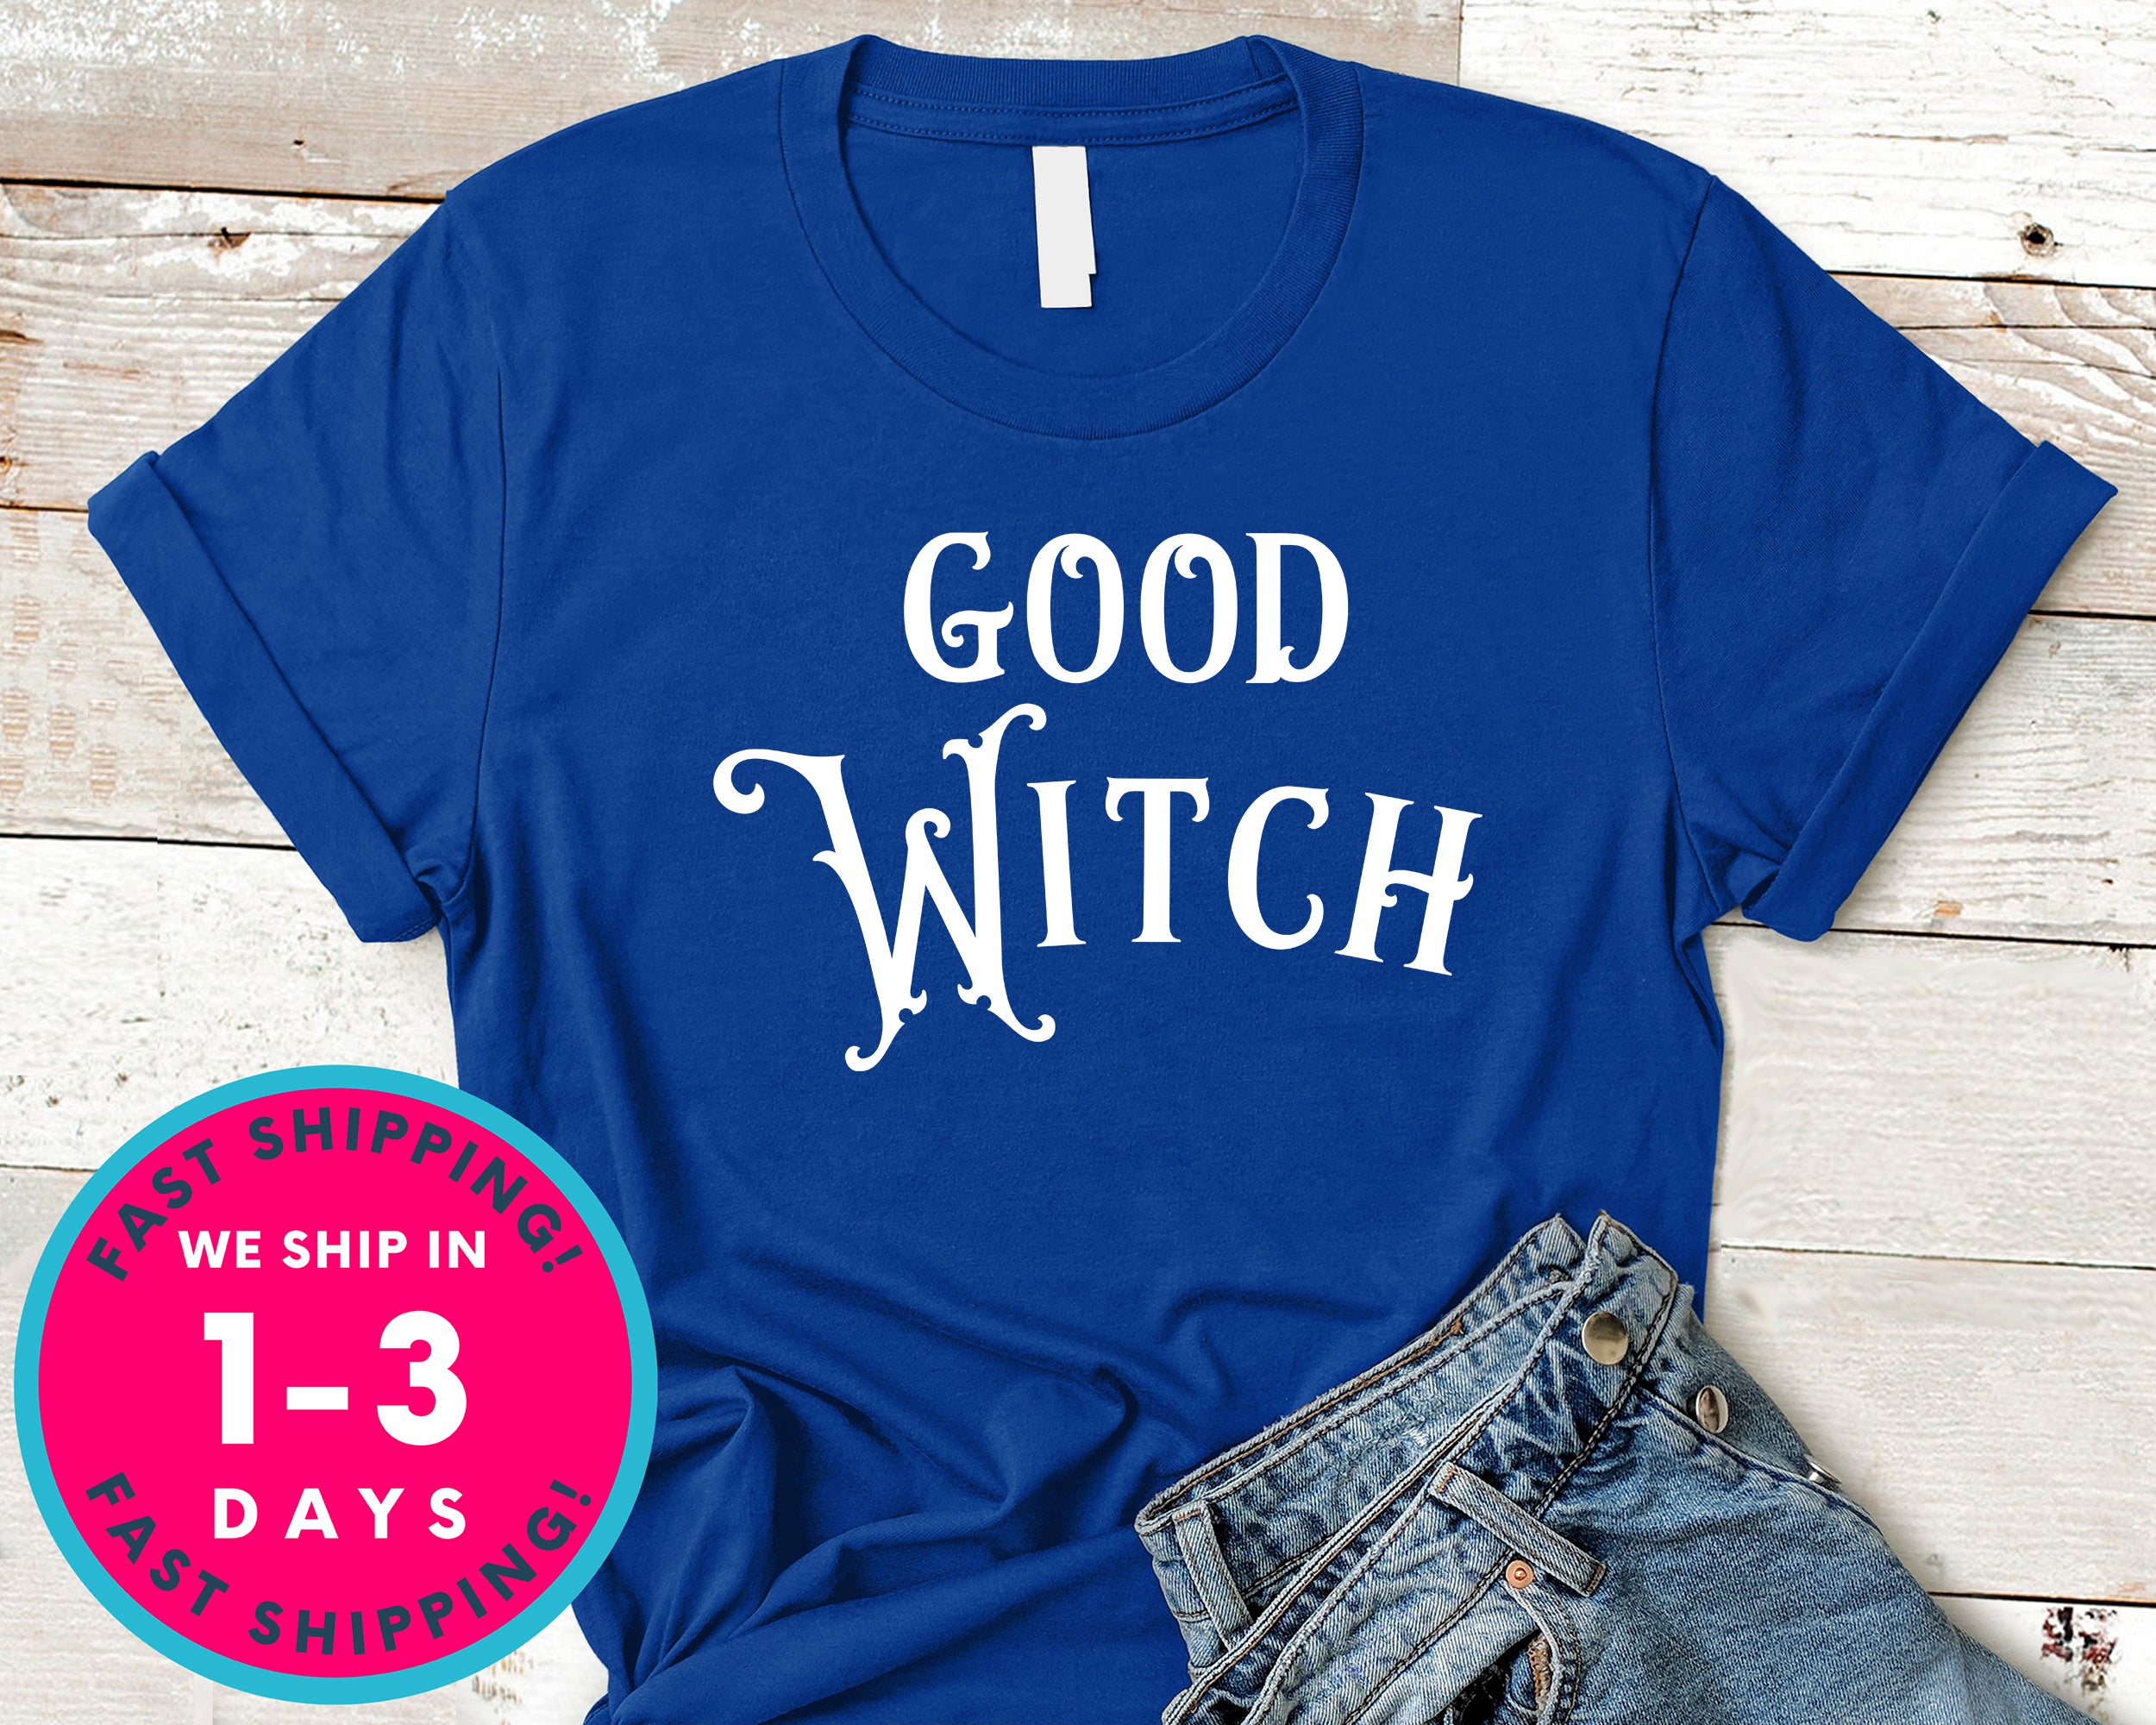 Good Witch (couple Tee) T-Shirt - Halloween Horror Scary Shirt